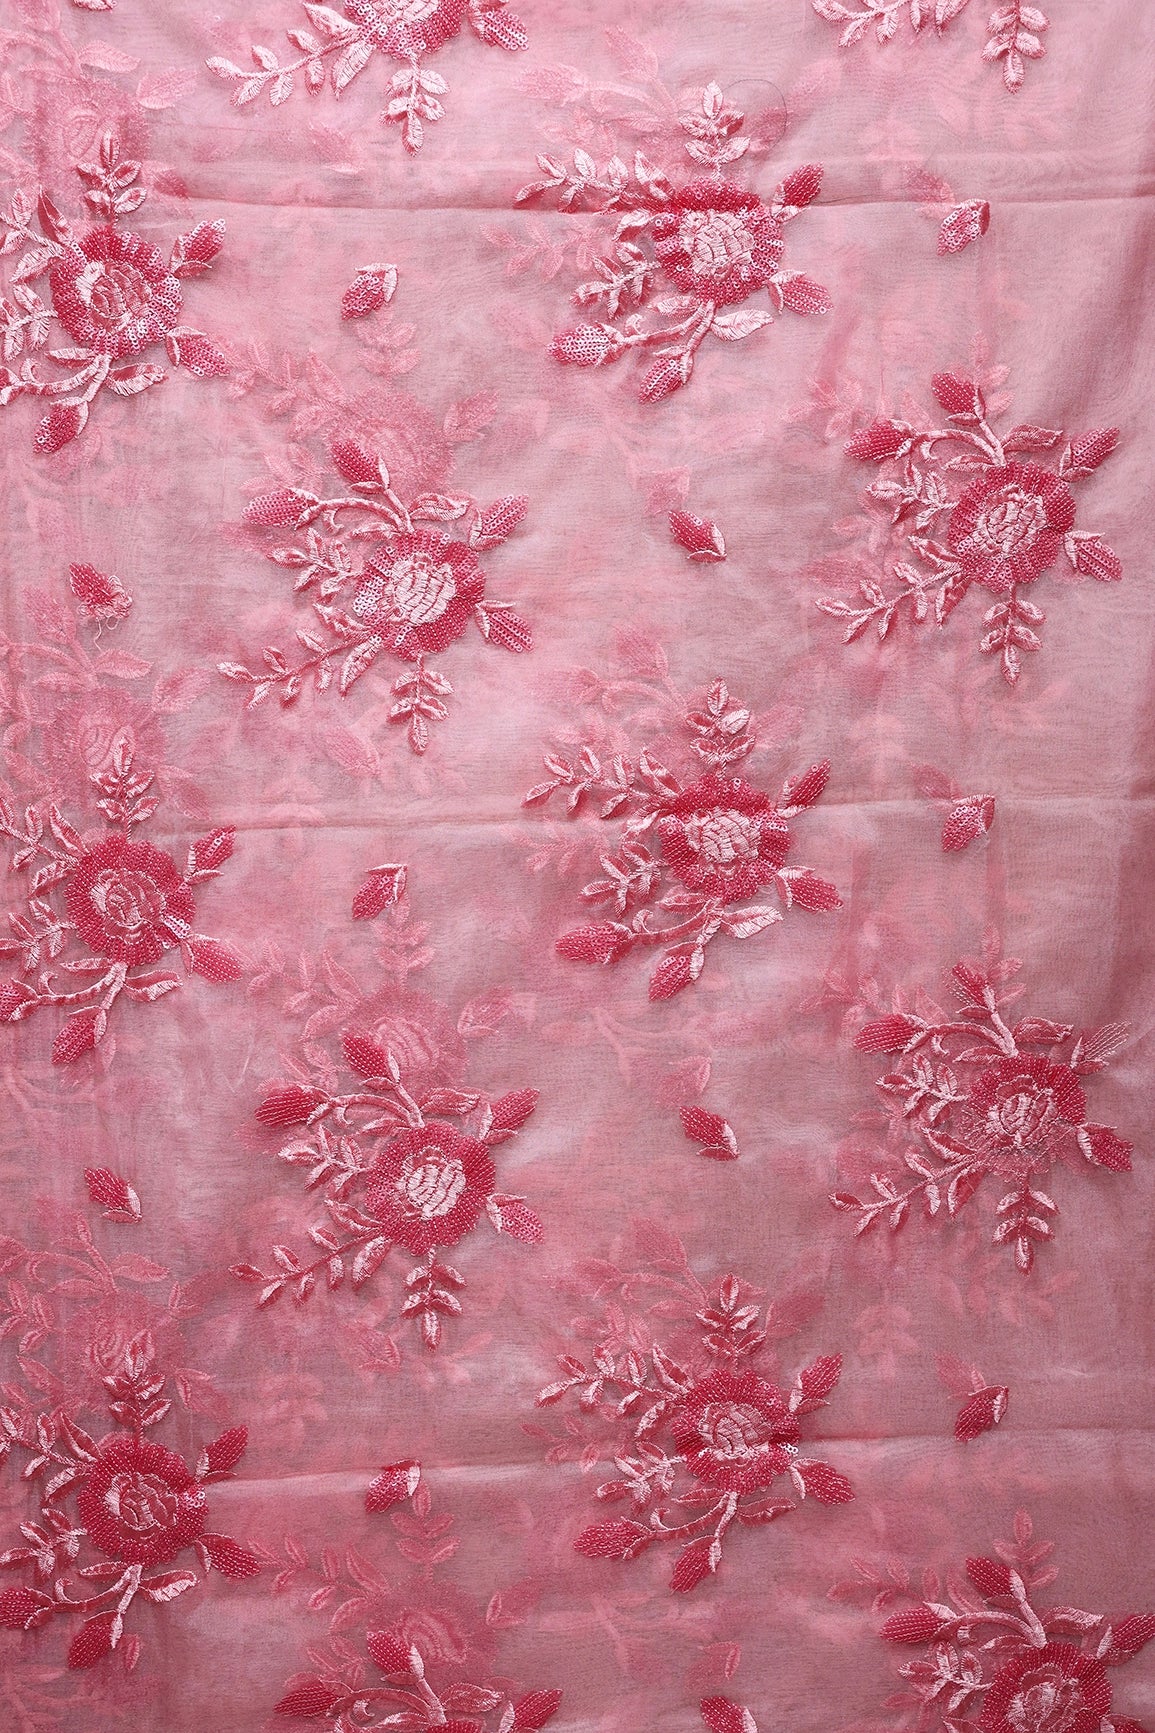 2 Meter Cut Piece Of Pink Thread With Sequins Floral Embroidery On Salmon Pink Organza Fabric